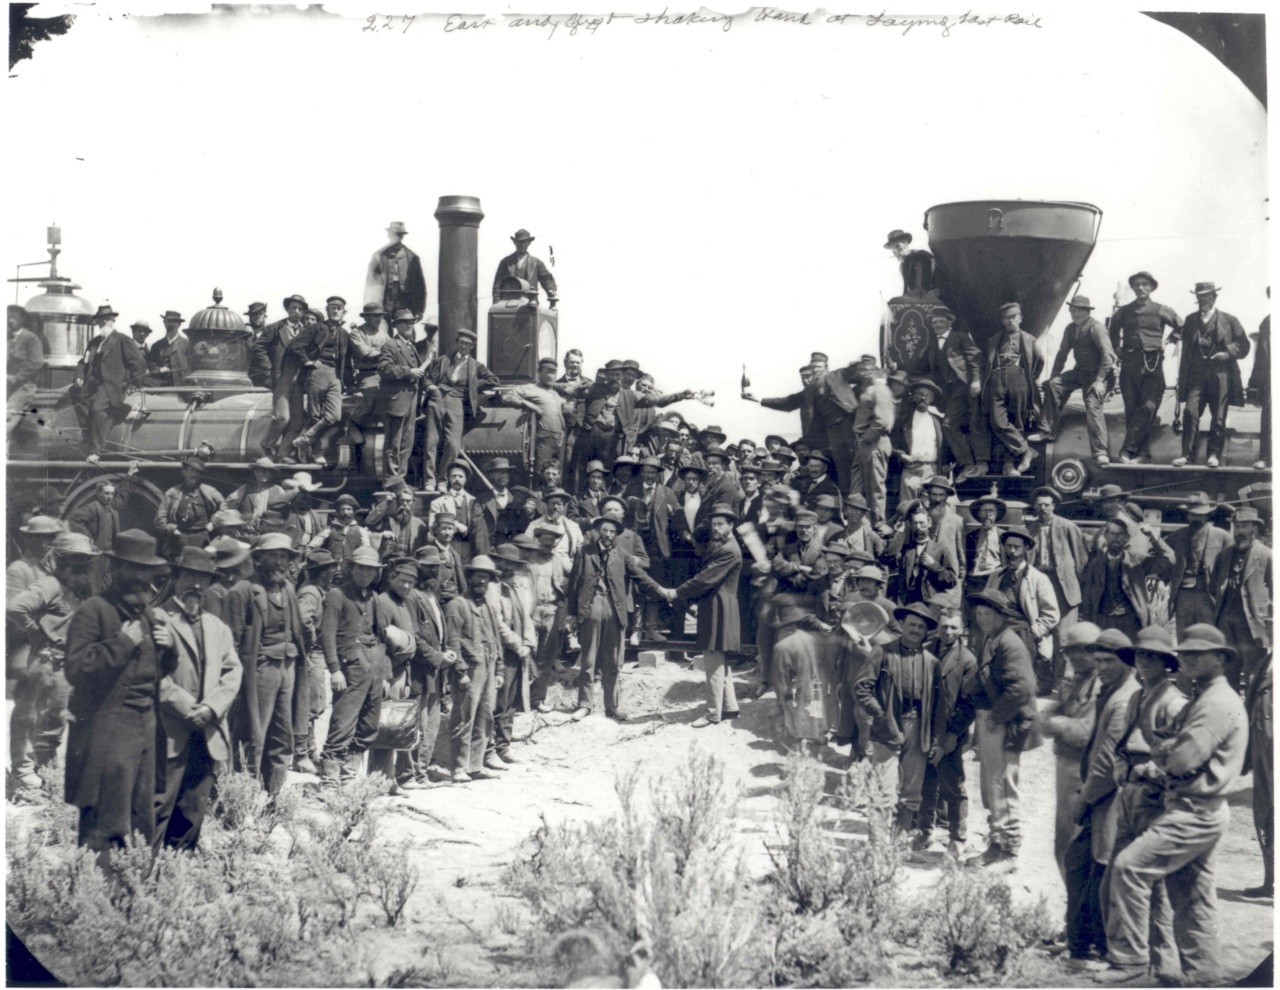 Image description: This photo shows the joining of two railroads, marking the 143rd anniversary of the completion of the First Transcontinental Railroad across the United States. Completed on May 10, 1869, the railroad shortened the cross country trip from four months to just one week.
A ceremony was held in Promontory Summit, Utah, about 35 miles away from where the railroad was joined together by the “Golden Spike,” which finally connected the two sides of the railroad, marking its completion. The National Park Service now operates the Golden Spike Historical Site in Promontory Point, Utah.
Learn more about the First Transcontinental Railroad.
Photo by A.J. Russell and Charles Phelps Cushing, photographers documenting the event.